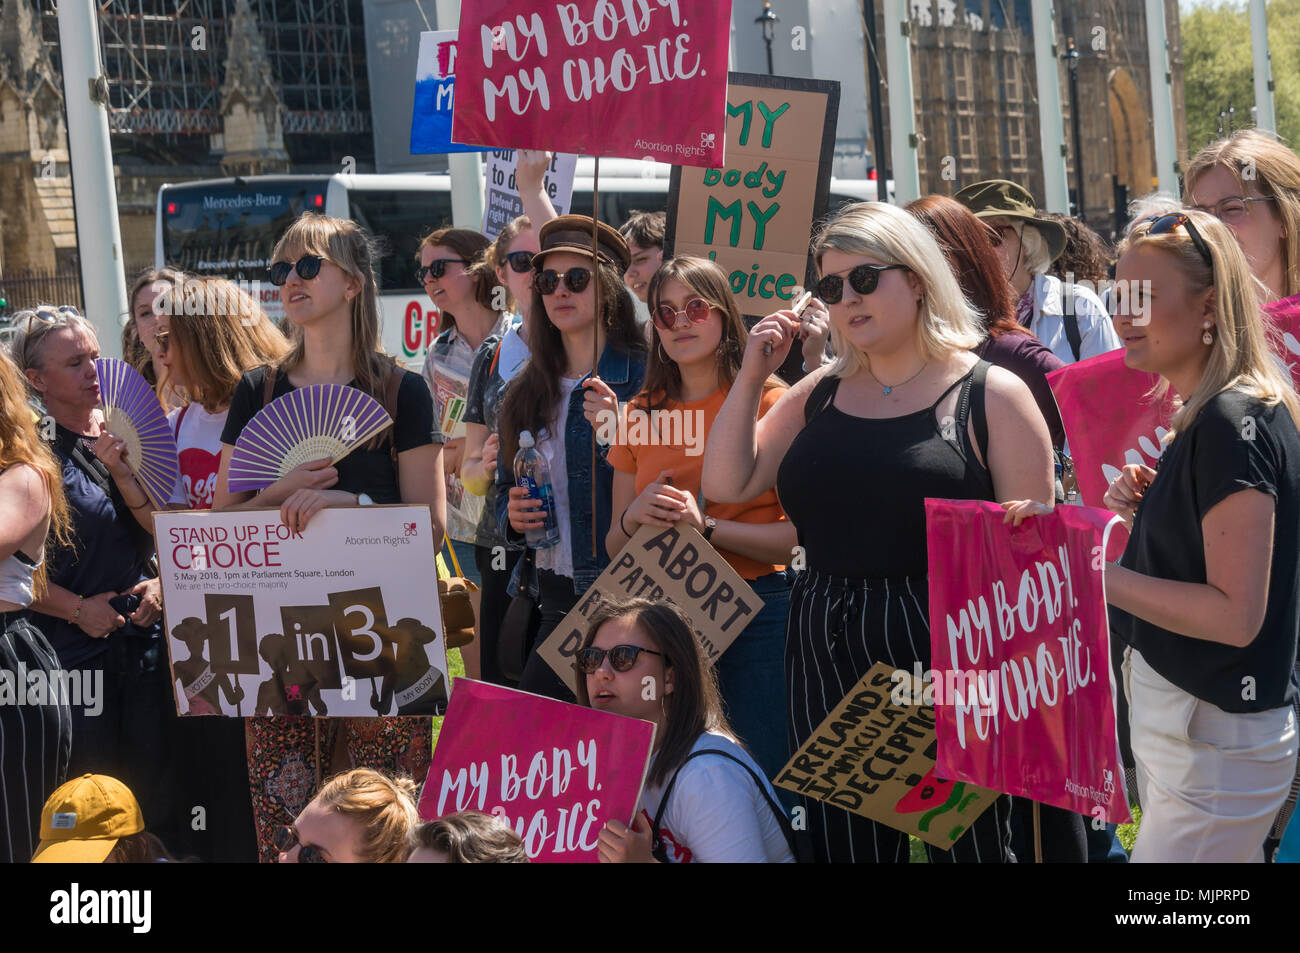 London, UK. 5th May 2018. Women in the abortion rights campaign hold a rally in Parliament Square before the annual March for Life UK by pro-life anti-abortion campaigners was to march to a rally there. They insisted on the right for women to choose and opposed to any increase of restrictions which would lead to the problems we saw before the 1967 Abortion Act, when women risked their lives in back street abortions. They called for women in Northern Ireland to be given the same rights as in the rest of the UK and for an end of the harassment of women going into clinics, and supported the Irish Stock Photo